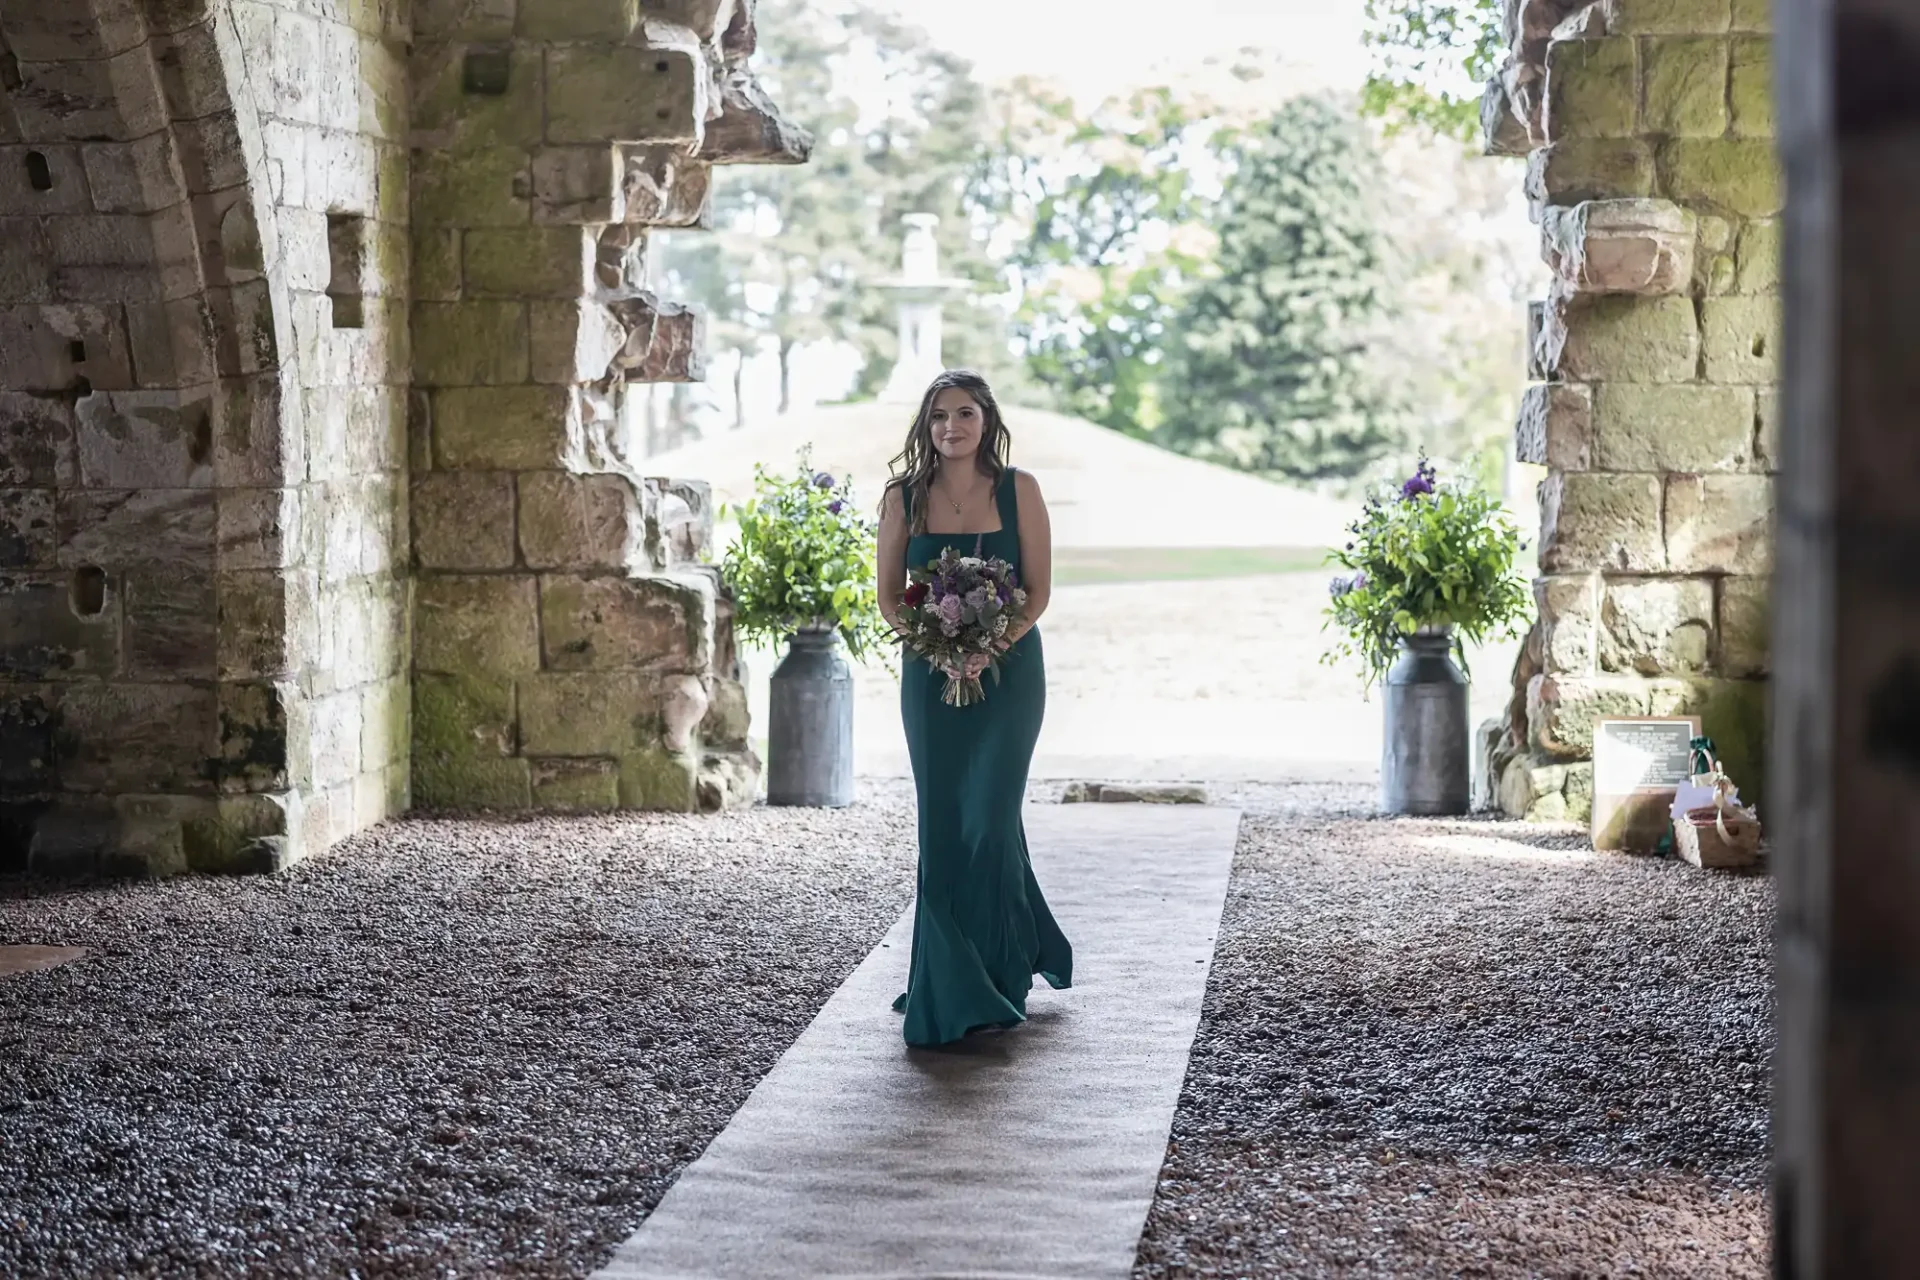 A woman in a green dress walks down a carpeted aisle inside a stone archway, holding a bouquet of flowers.